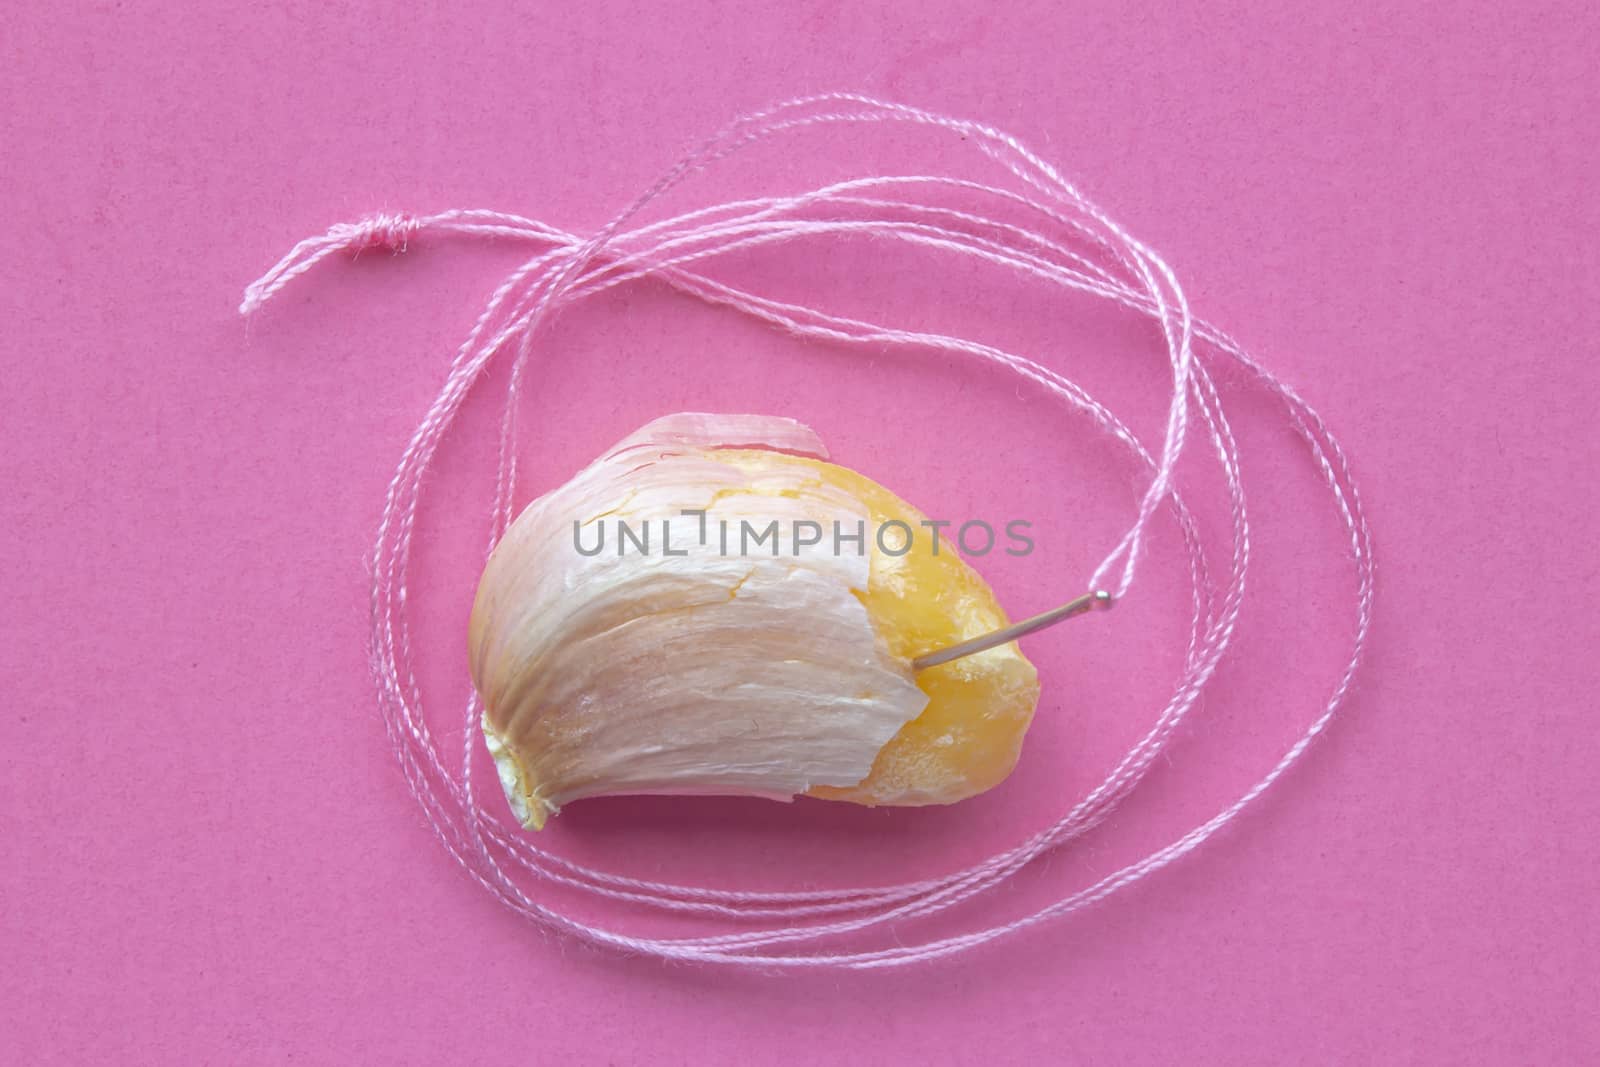 A single garlic with sewing needle and a pink Spool Of Pink Sewing Thread With Needle and pink background on the center. by oasisamuel